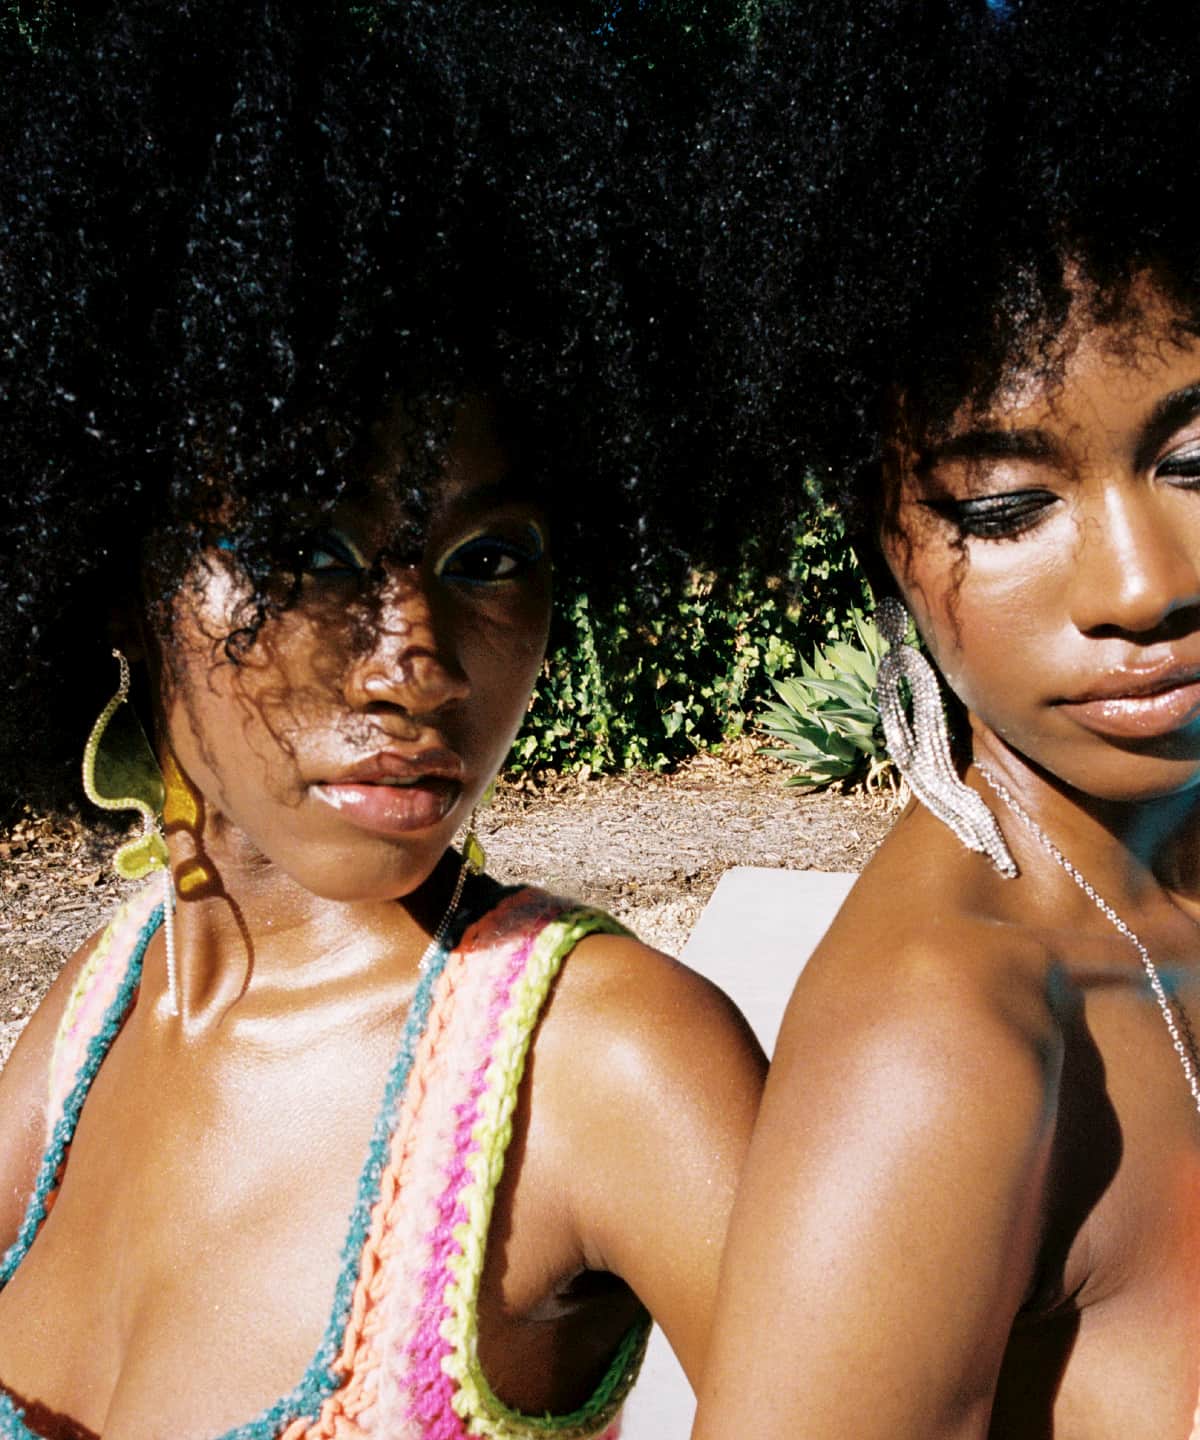 Twin models, Alana and Amaya January. They have brown curly hair and are standing shoulder to shoulder. One is wearing a crochet top and the other has a bikini top on. Their skin is glowing in the sunlight.